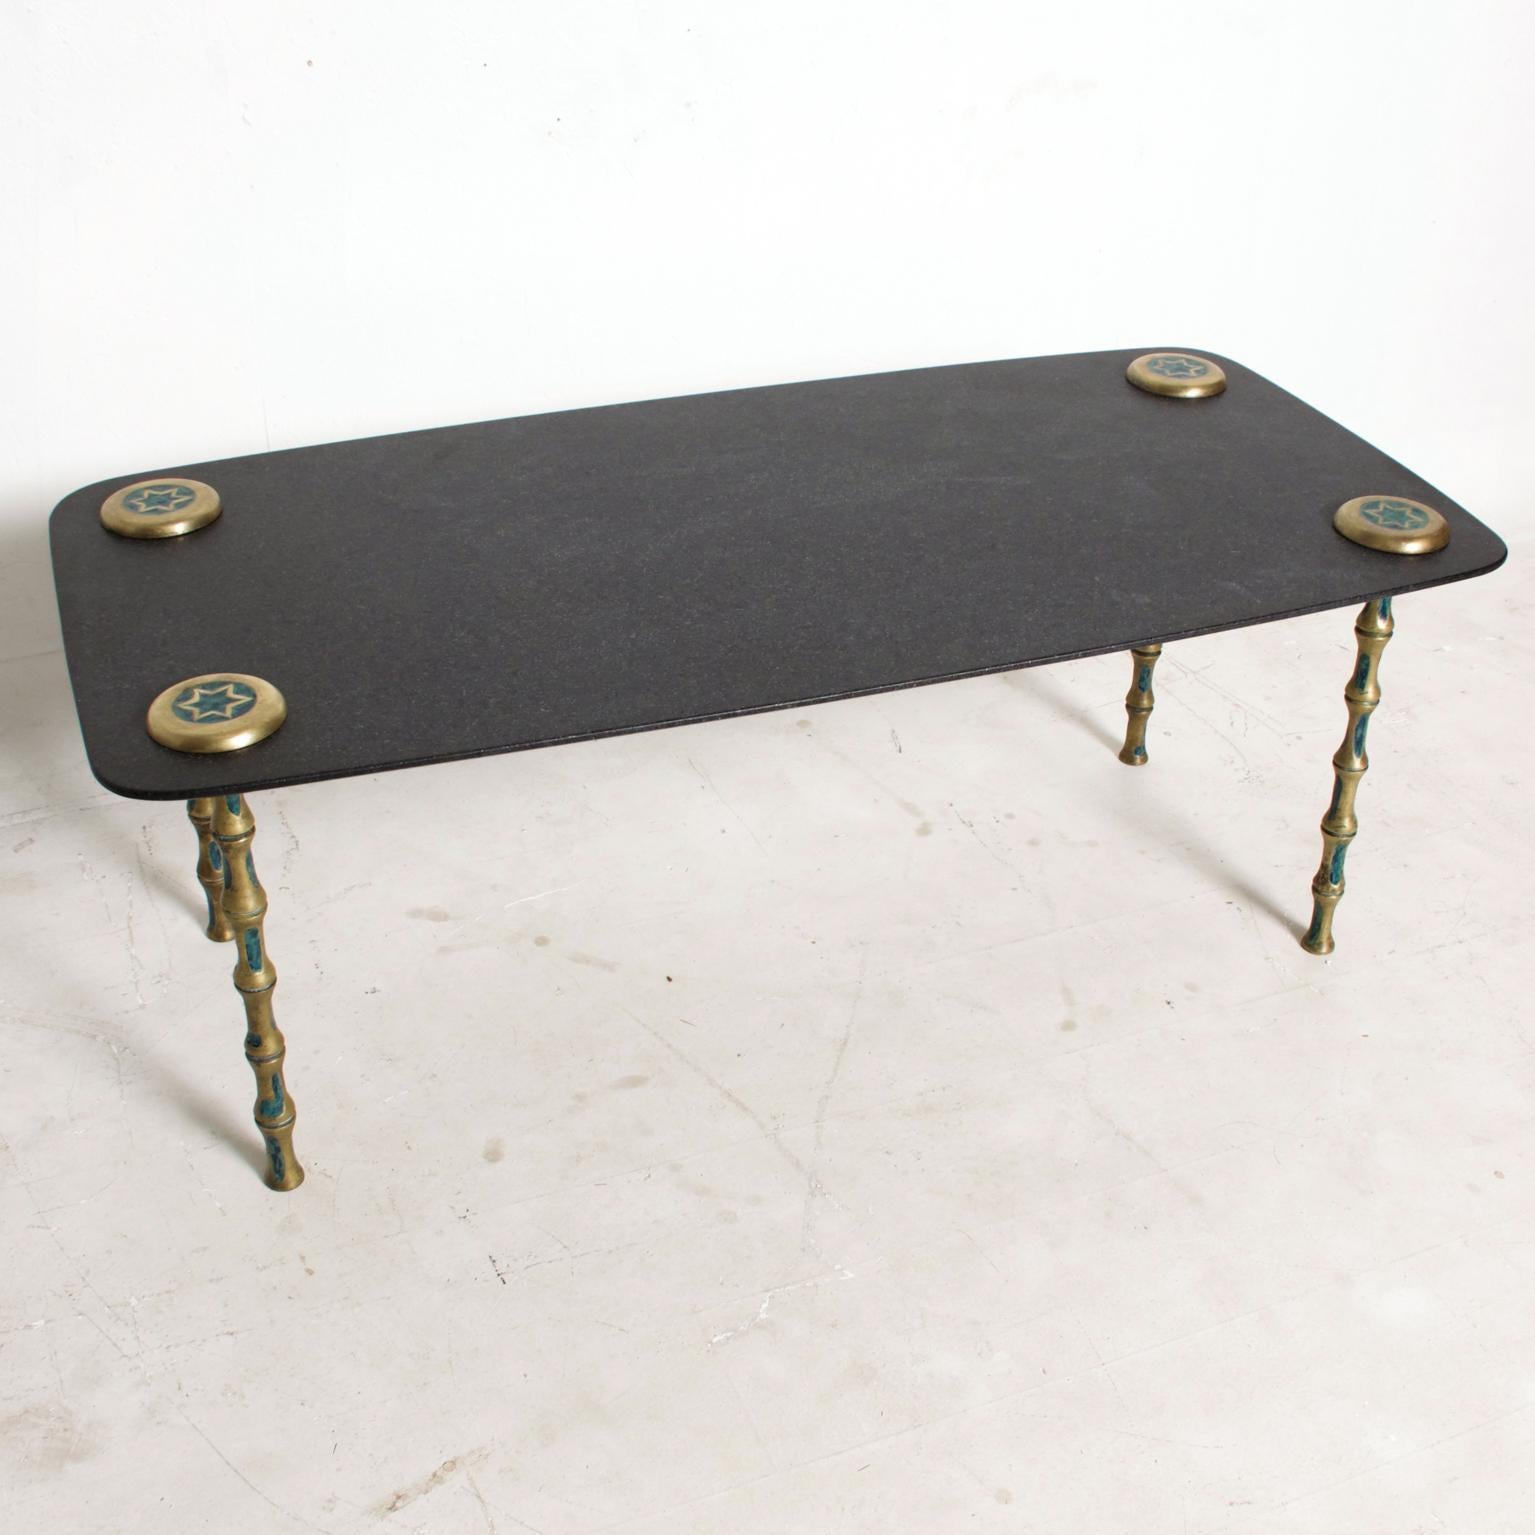 For your consideration: Mid Century Modern Pepe Mendoza Large Coffee Table Designed in Marble, Brass and Malachite Mexican Modernism at its best.
Dimensions are: 55